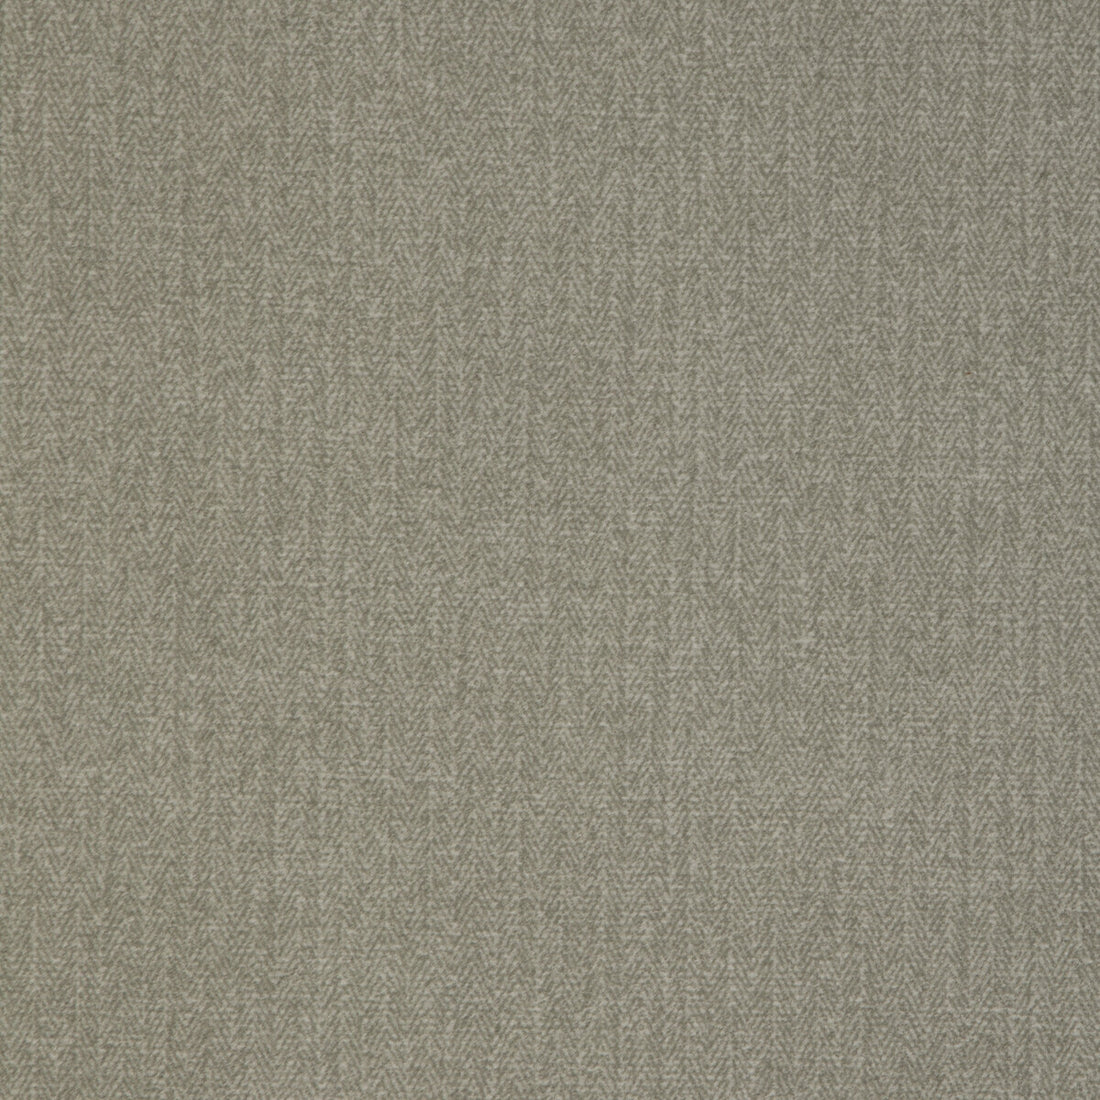 Kravet Design fabric in twill-350272 color - pattern TWILL.3502-72.0 - by Kravet Design in the Performance collection